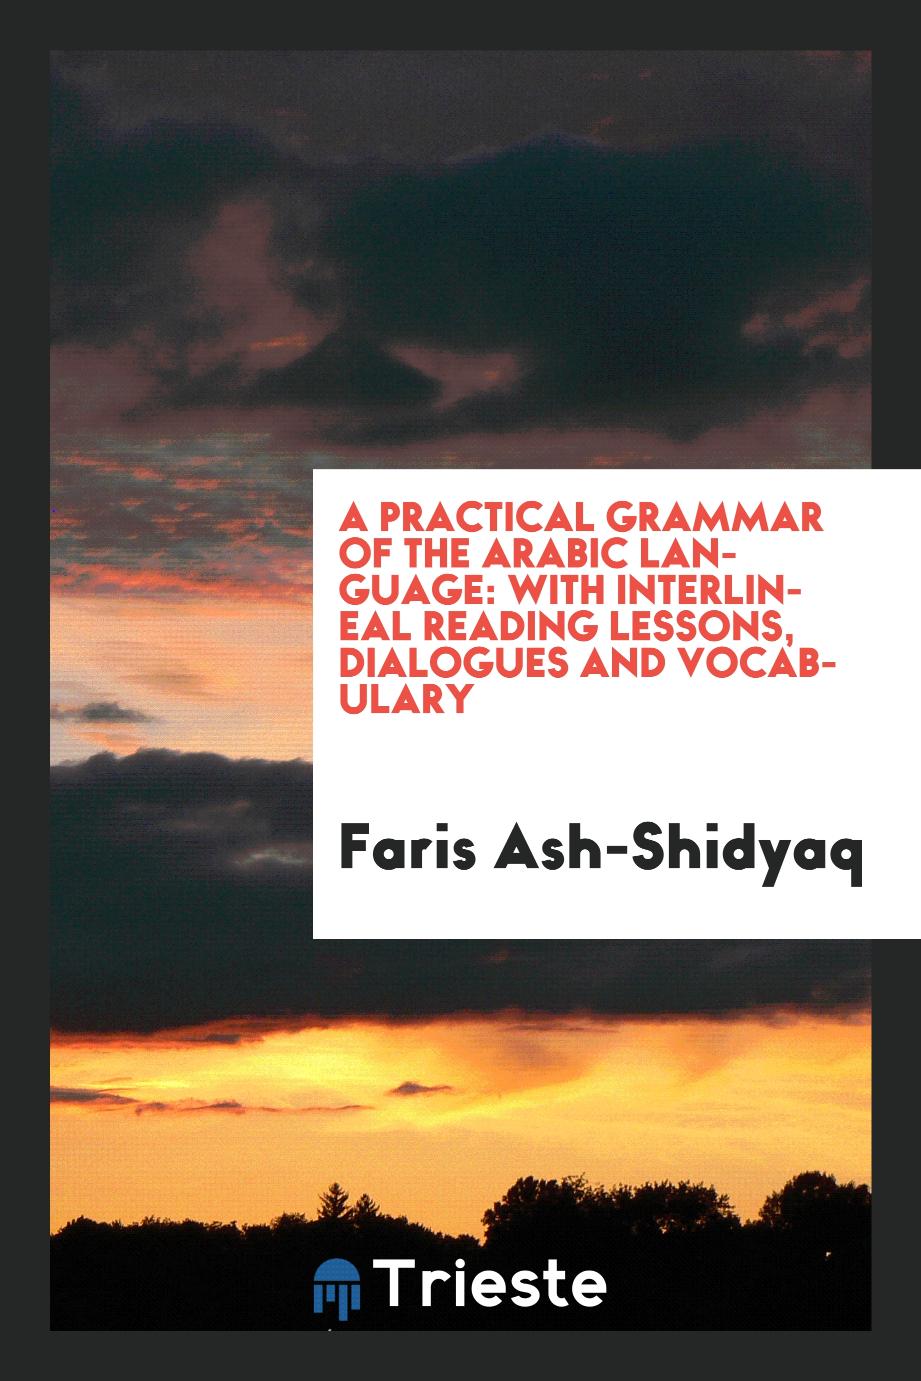 A practical grammar of the Arabic language: with interlineal reading lessons, dialogues and vocabulary